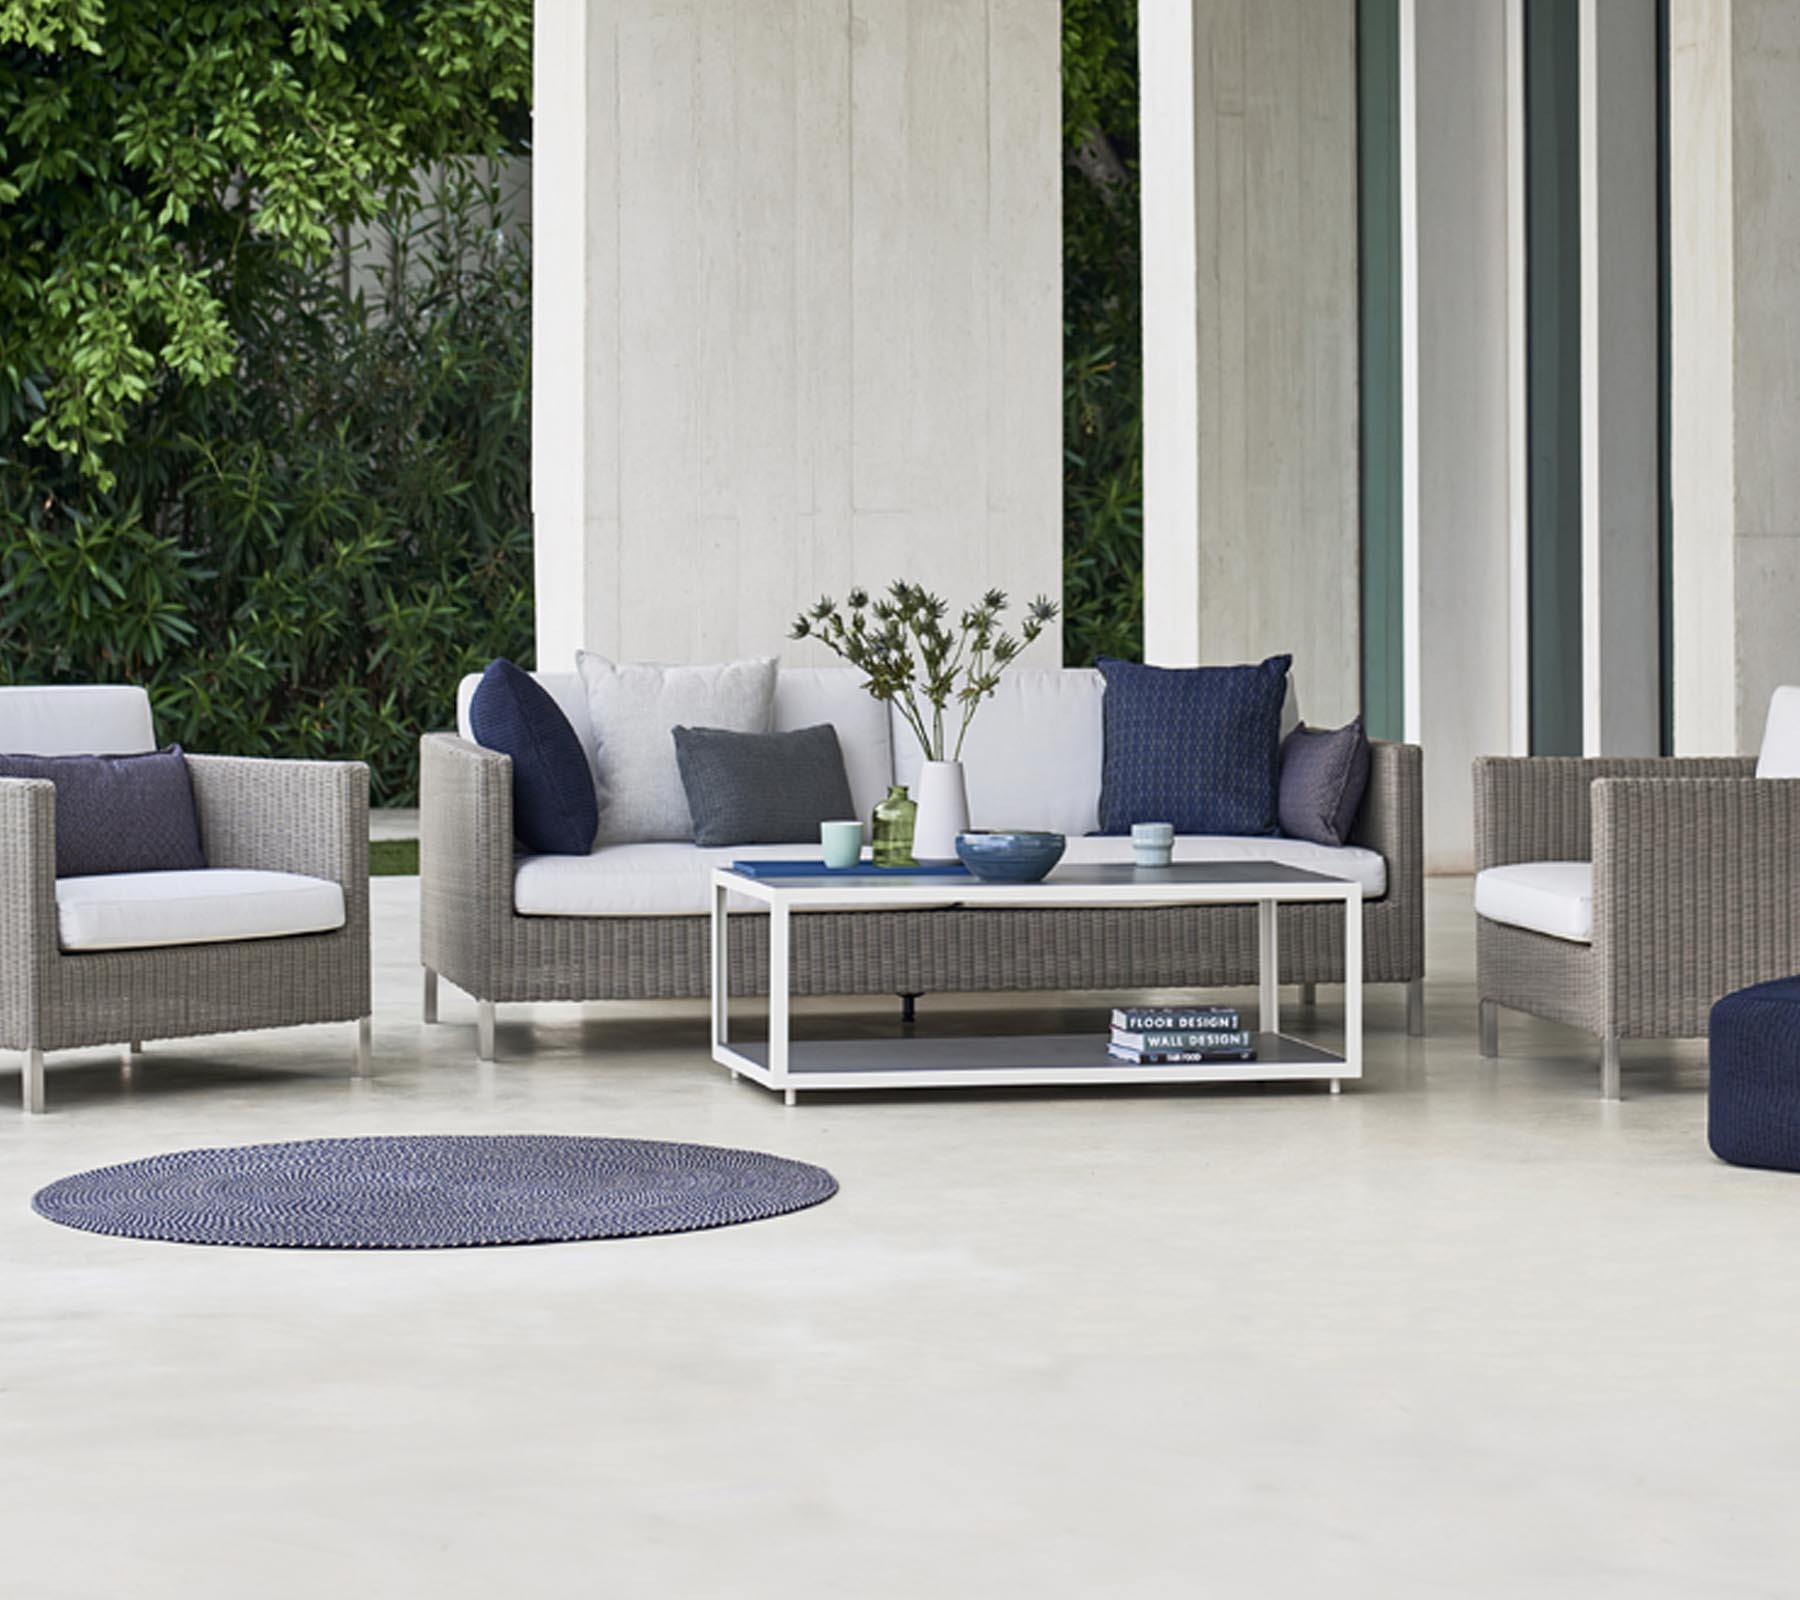 Boxhill's LEVEL Rectangle Coffee Table lifestyle image with 3-seater sofa and 2 lounge chair at patio